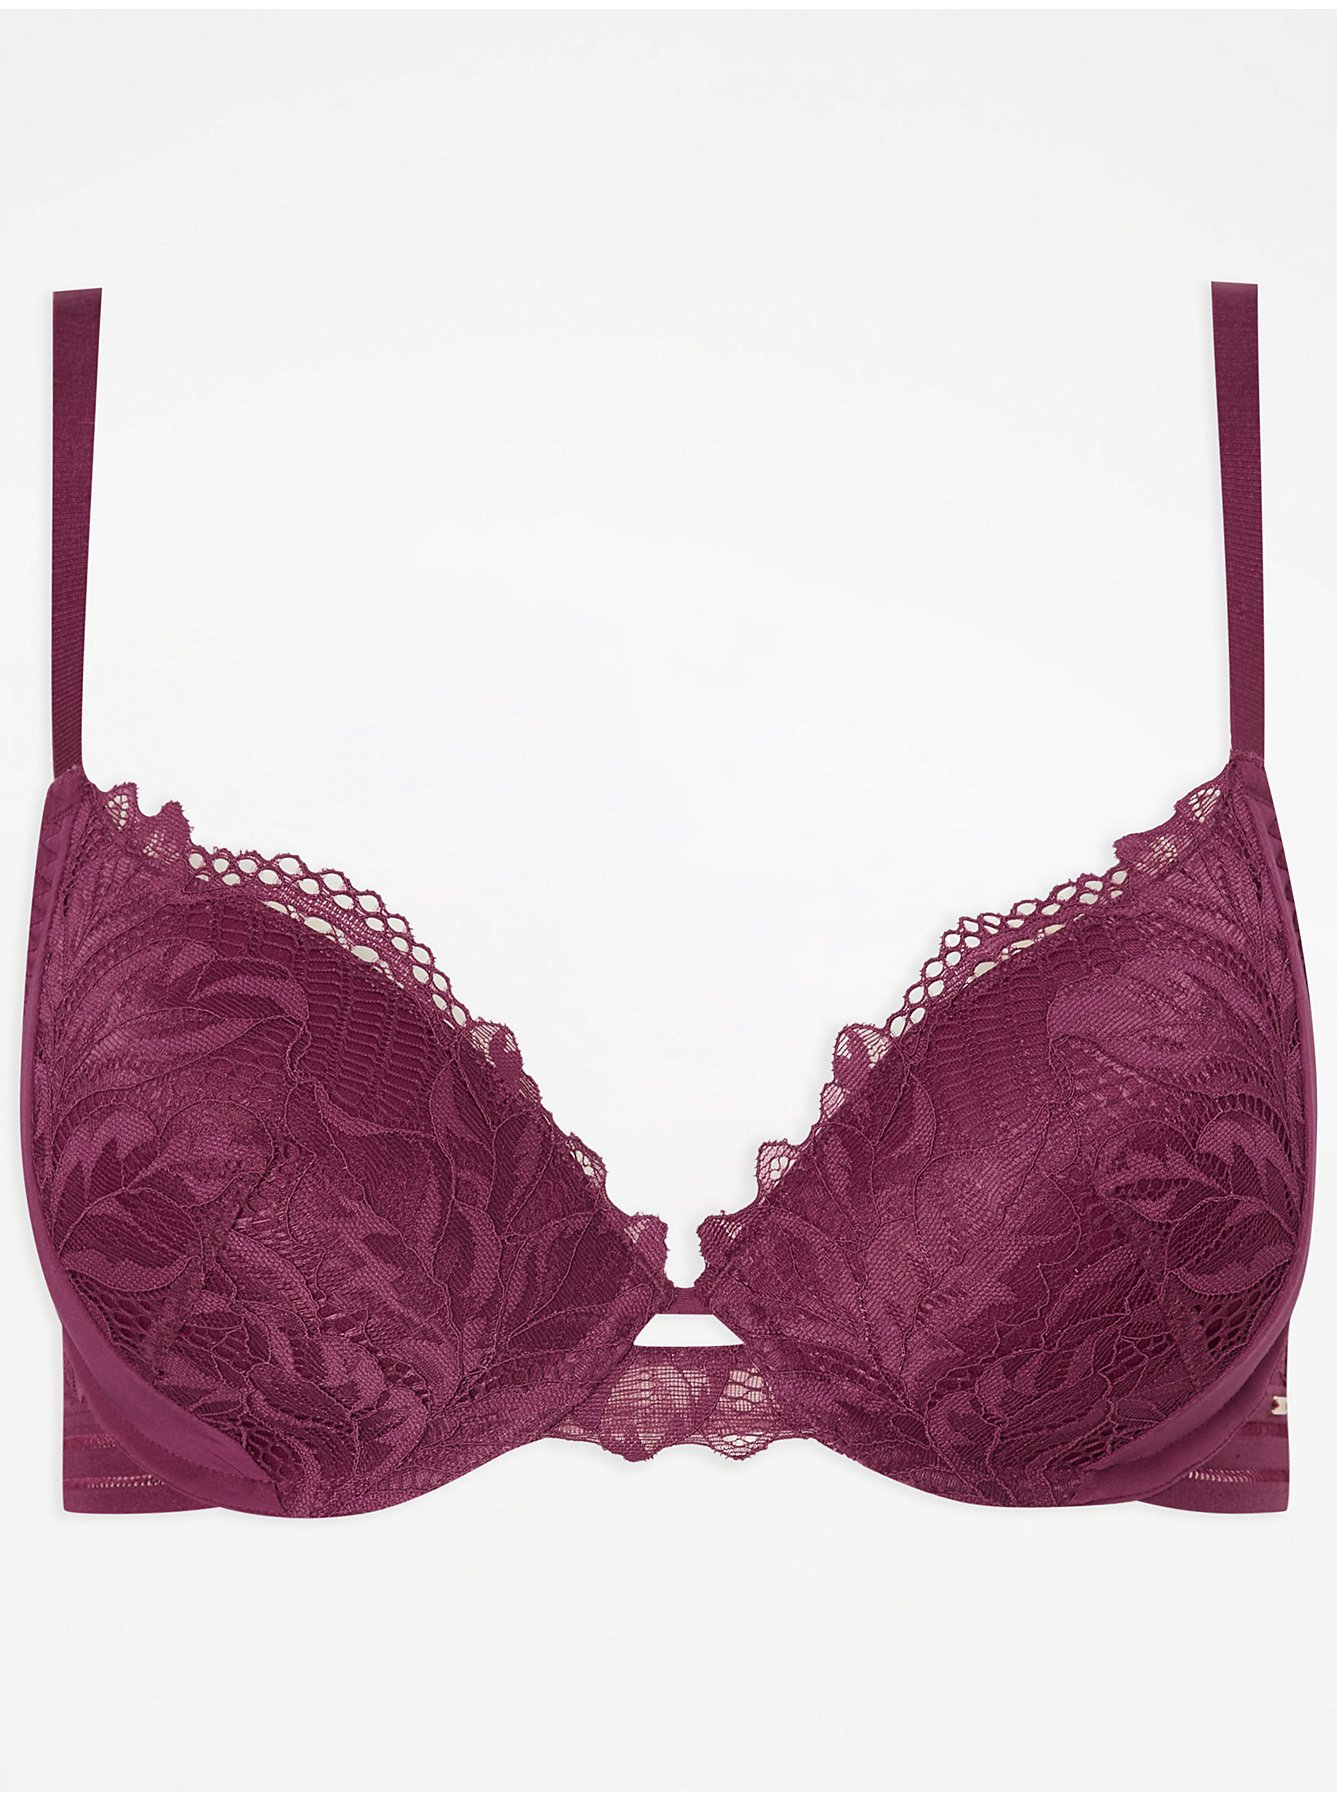 George All Lace Countured Bra